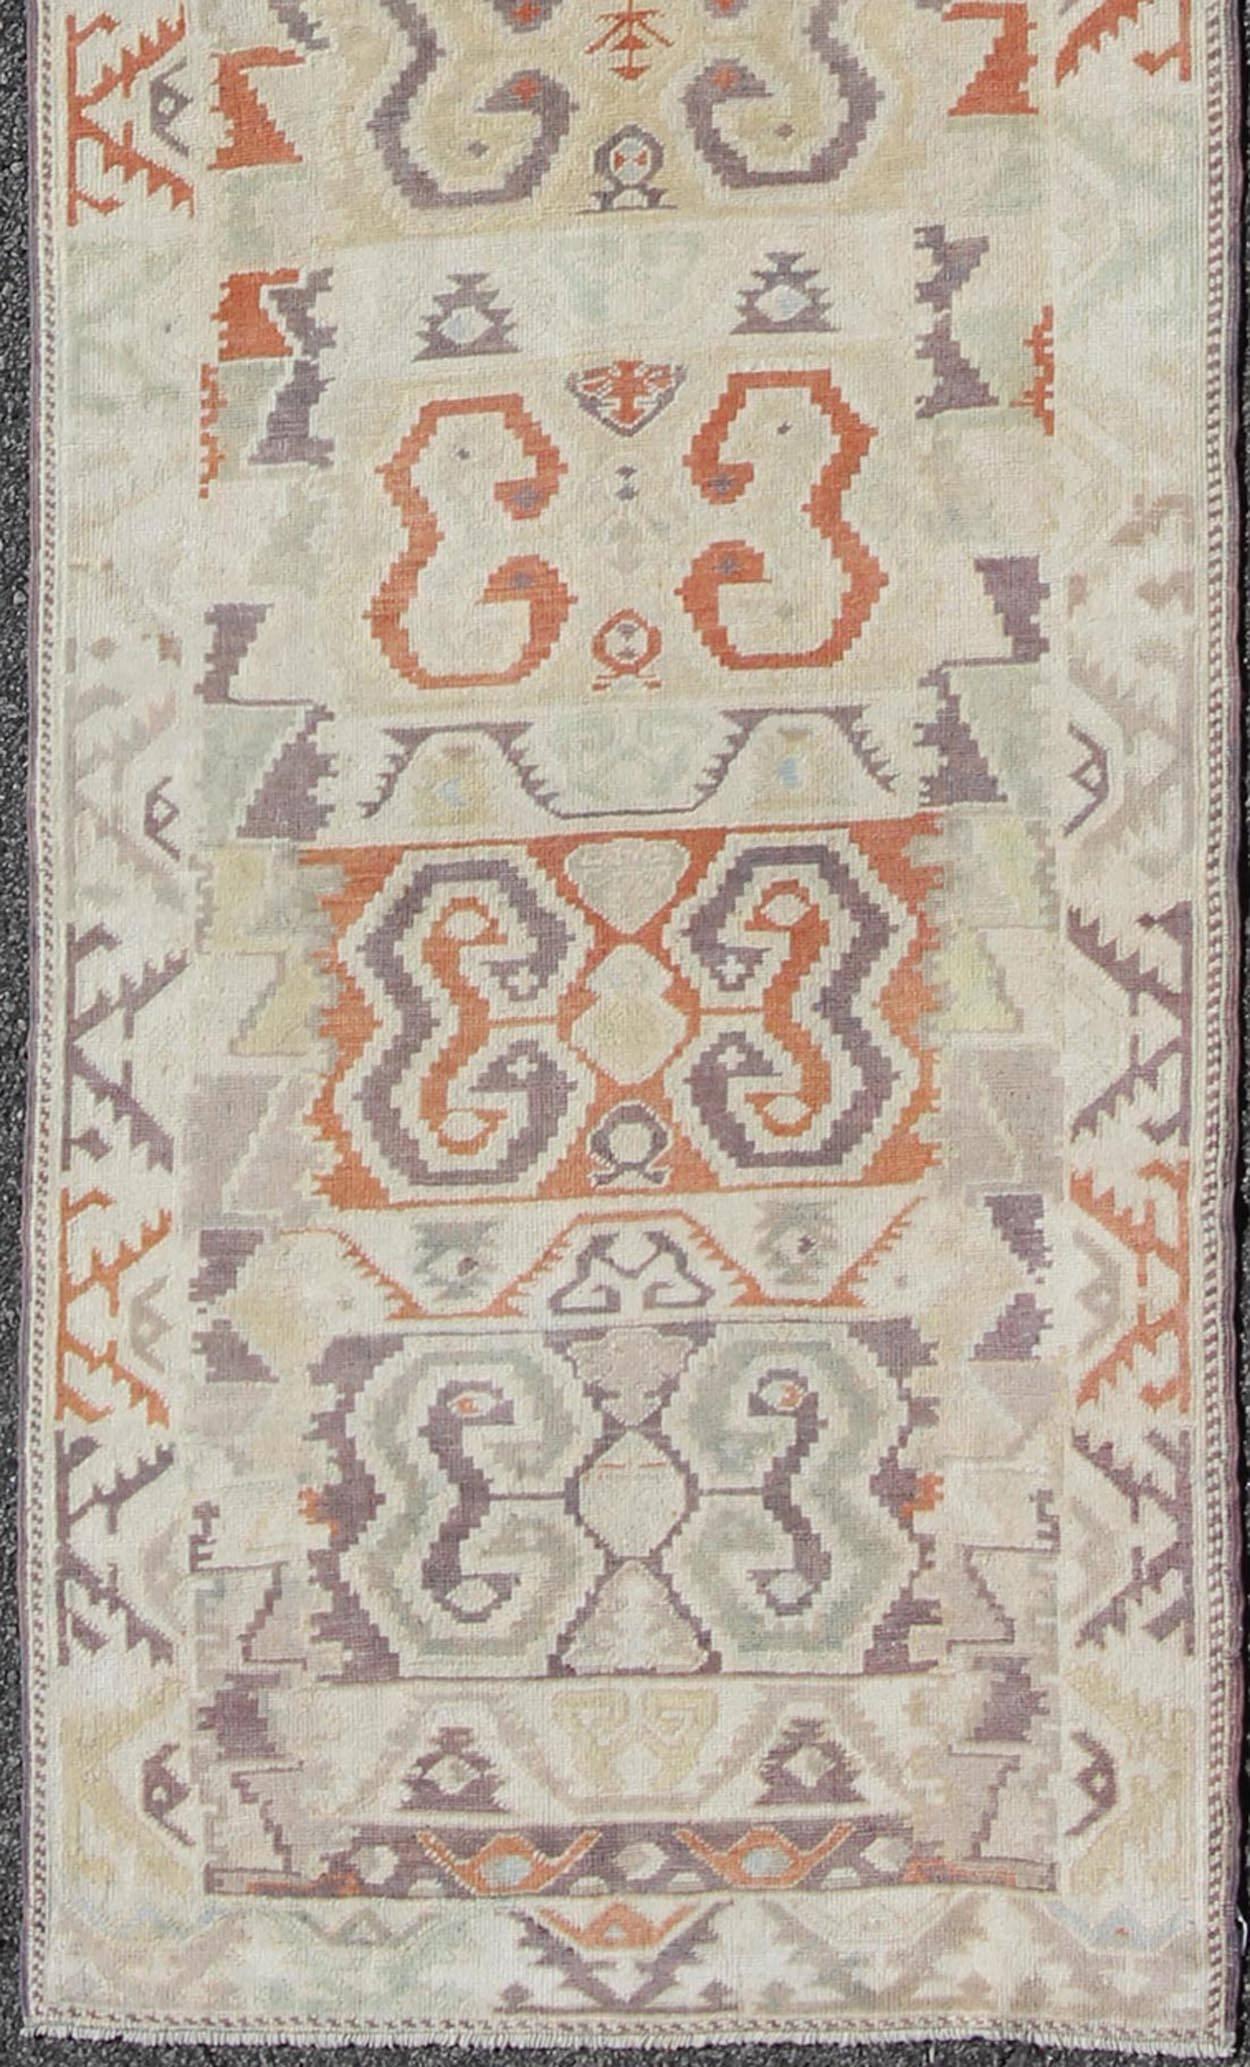 Unique Turkish Runner with Geometric and Tribal Elements.
This long and unique Oushak carpet rests beautifully upon a field of elegant golden and taupe colors. The large medallions are composed of various colors of blues, reds, taupe, rust and